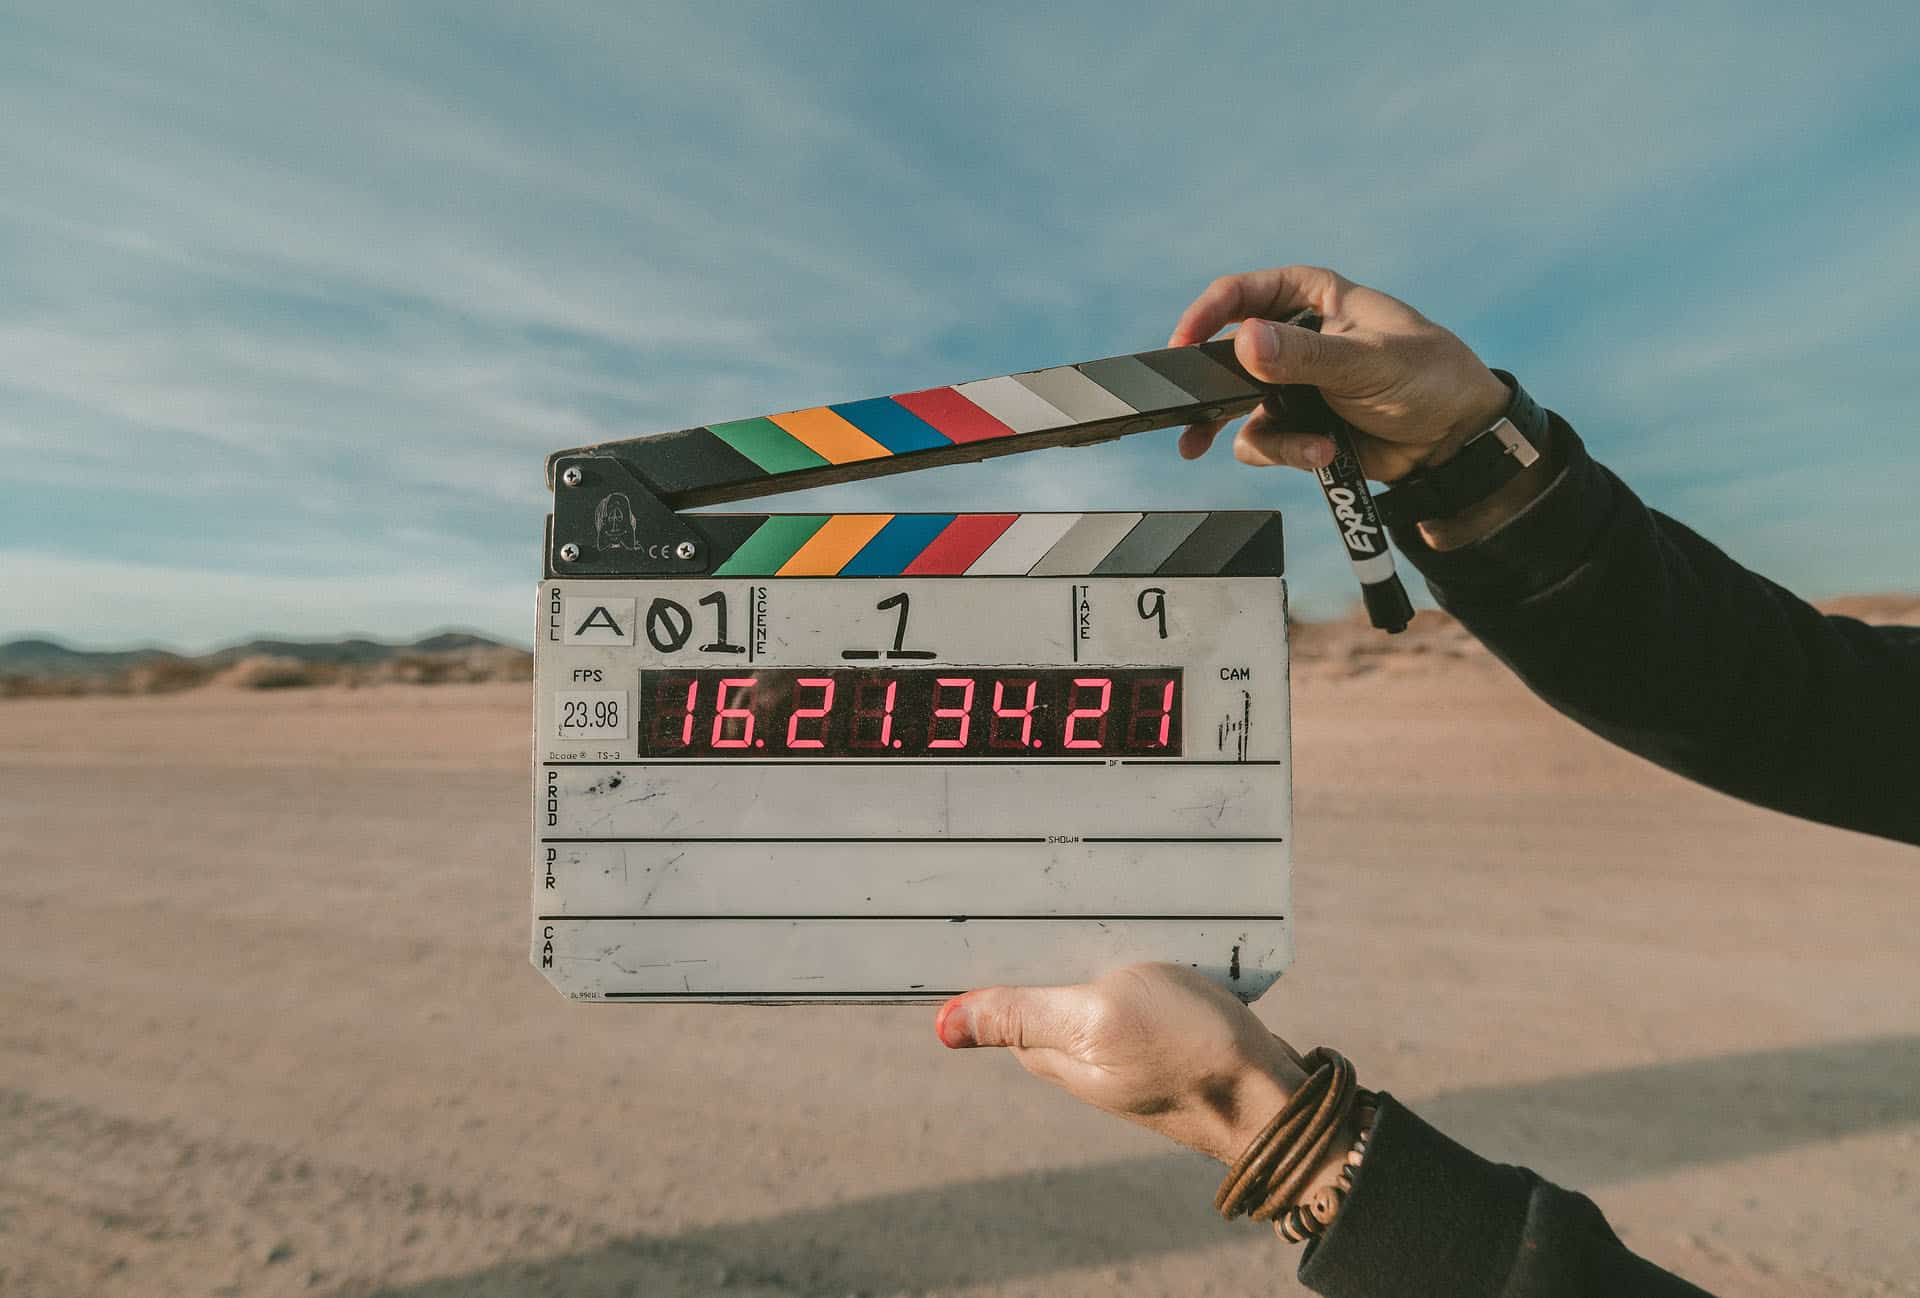 The Exciting Journey to Creating a Corporate Video: From Concept to Completion